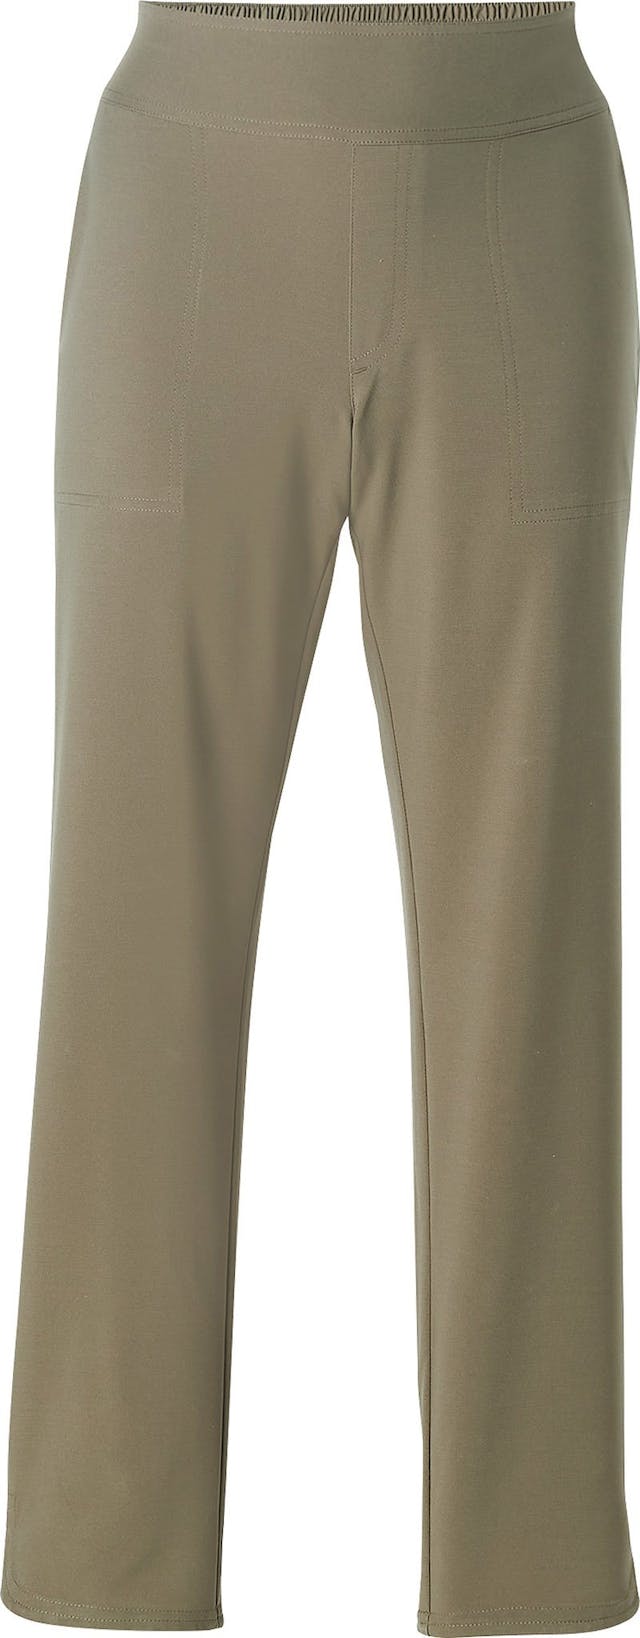 Product image for Sajilo Ankle Pant - Women's